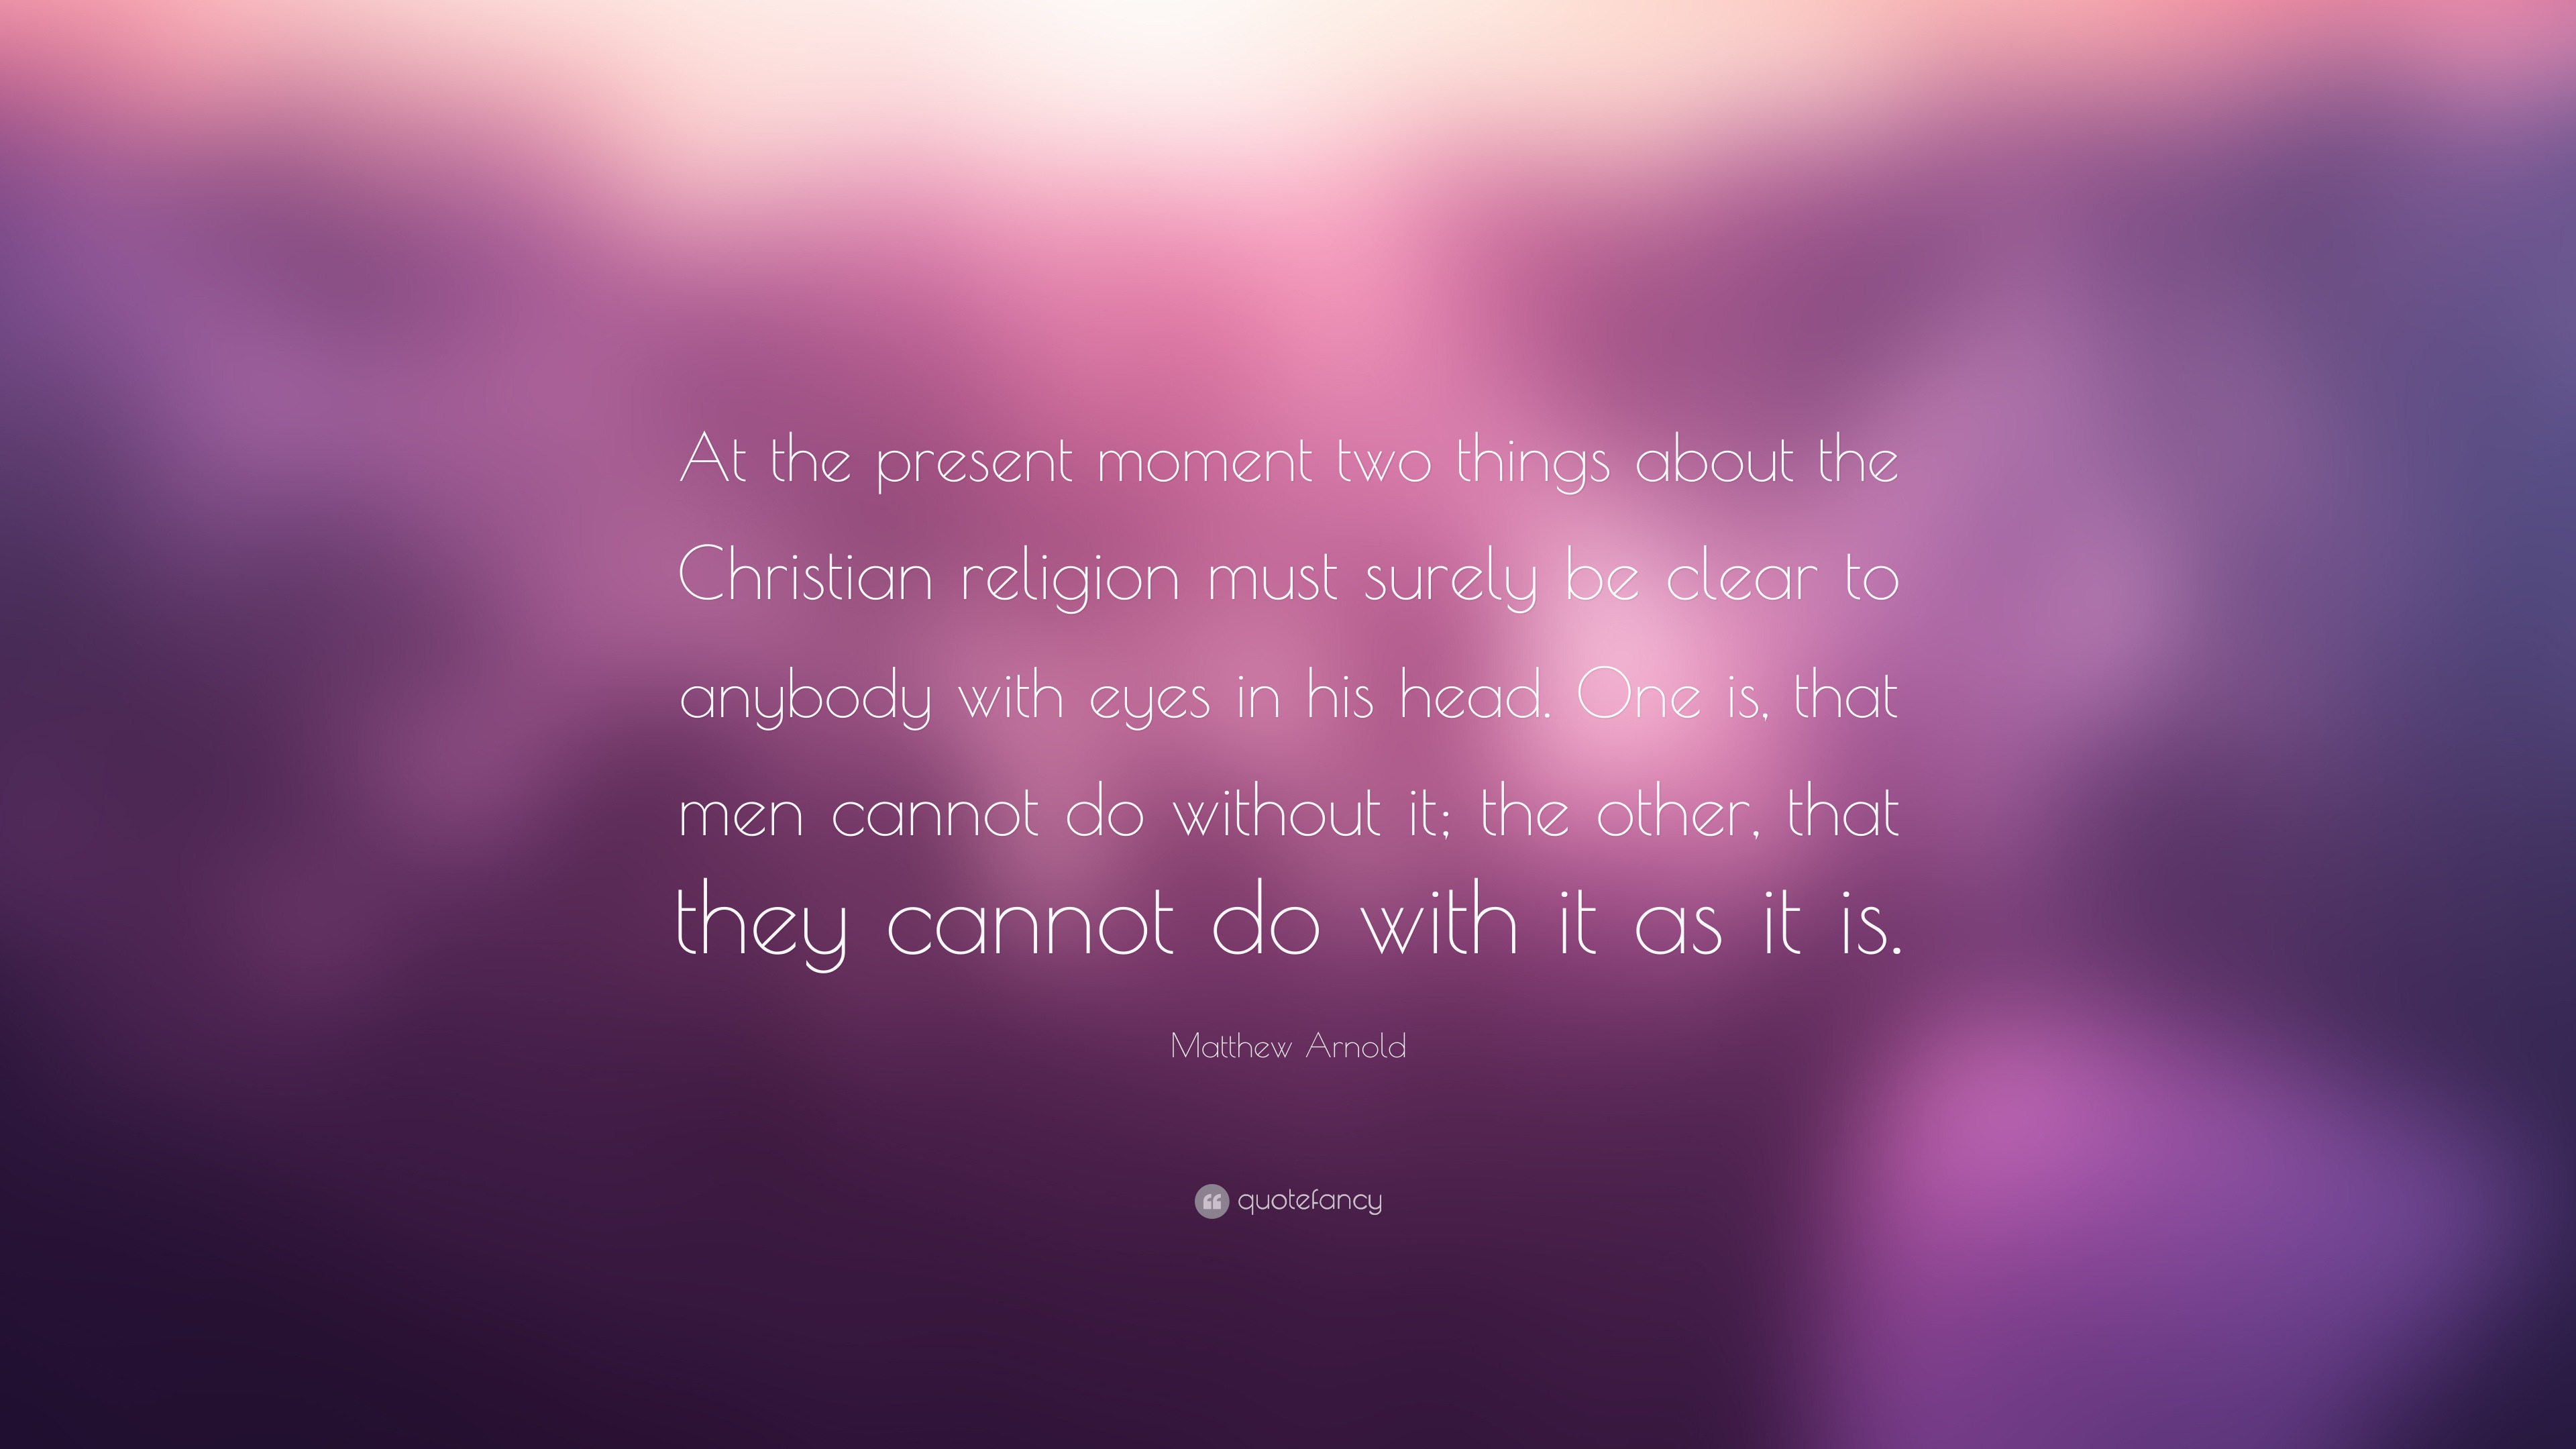 Matthew Arnold Quote: “At the present moment two things about the ...